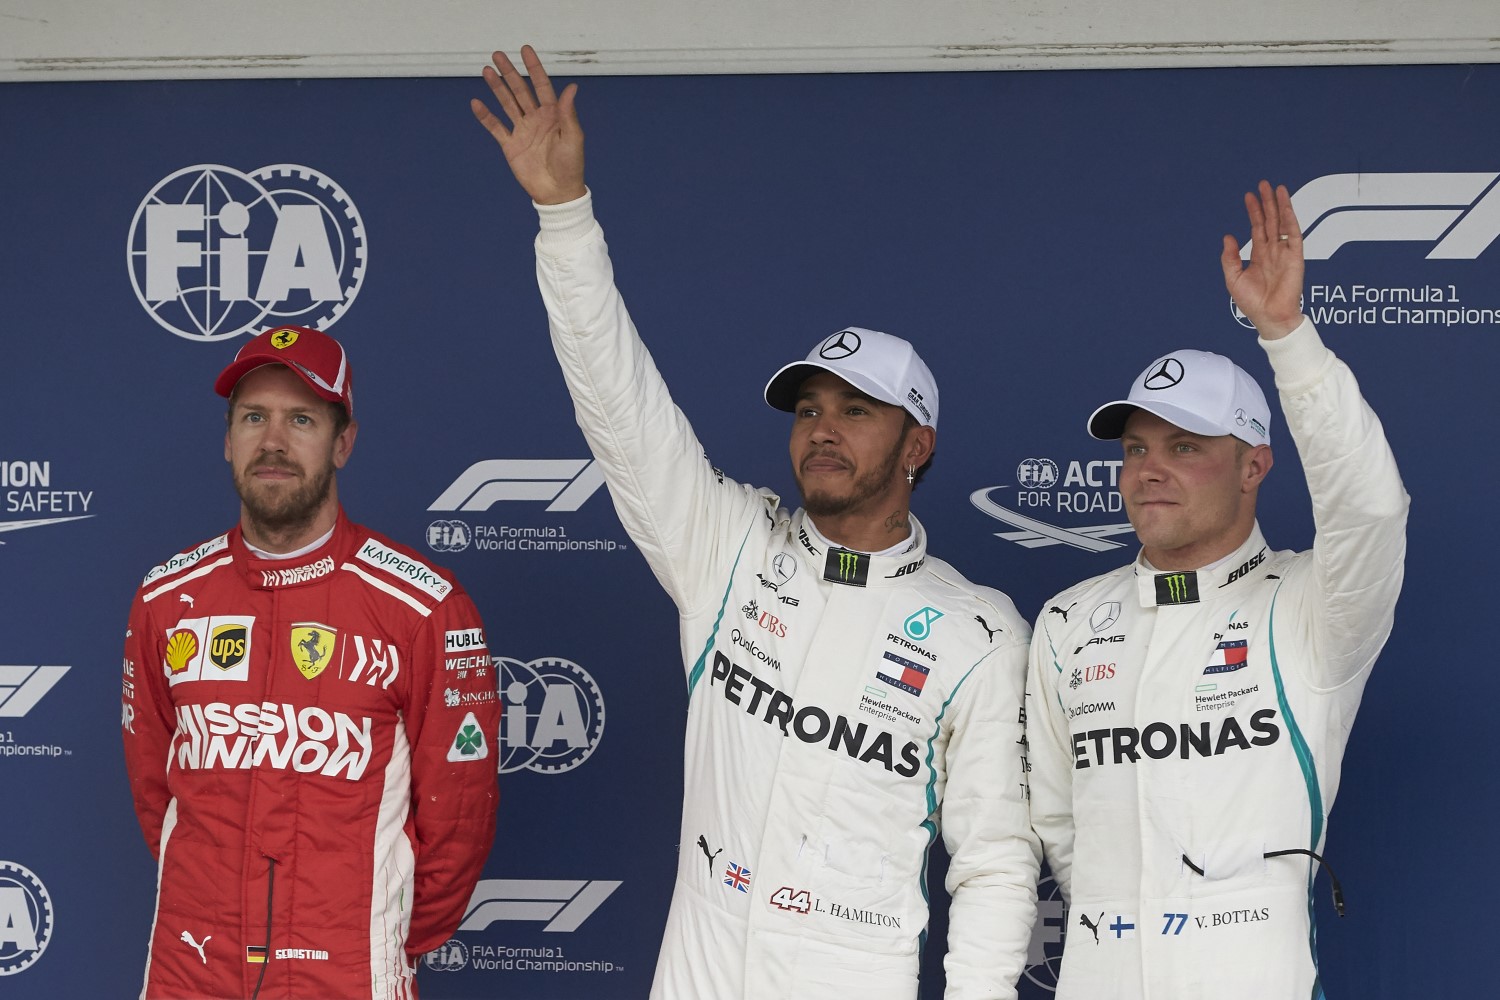 Hamilton and Bottas wave while Vettel waits to be disqualified